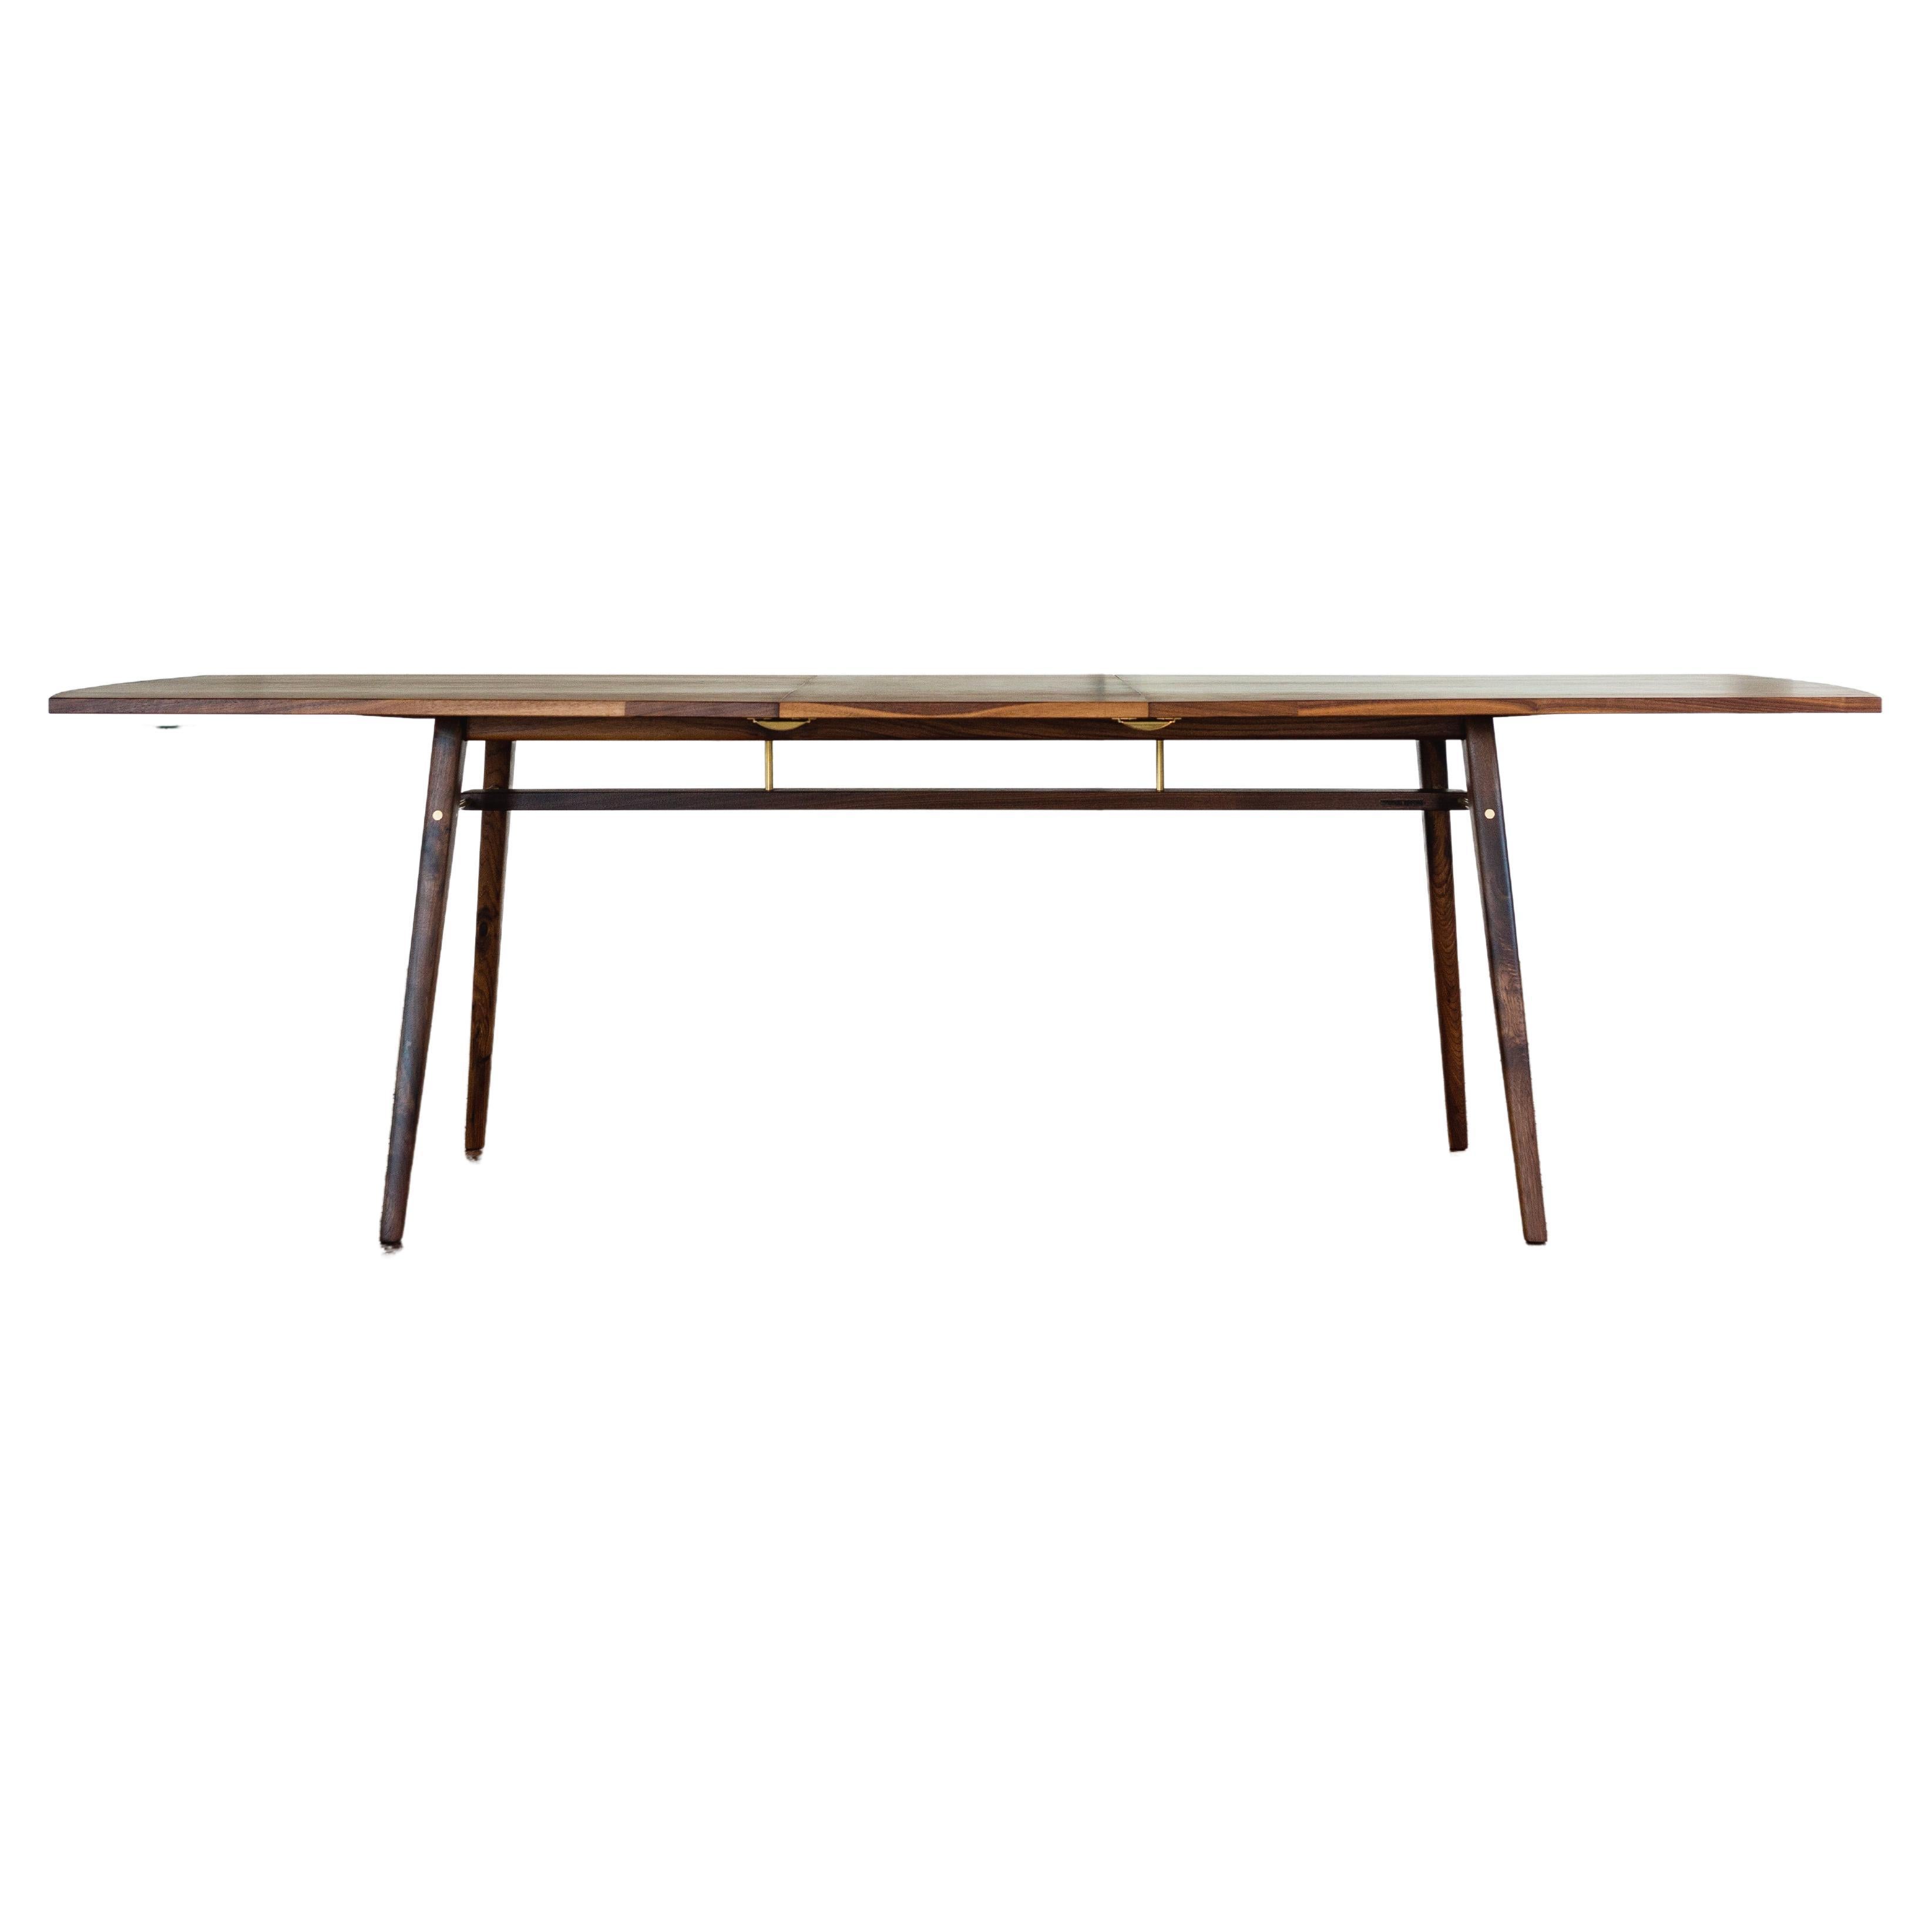 Flint Modern Extension Table in Walnut with Brass Joinery Details For Sale